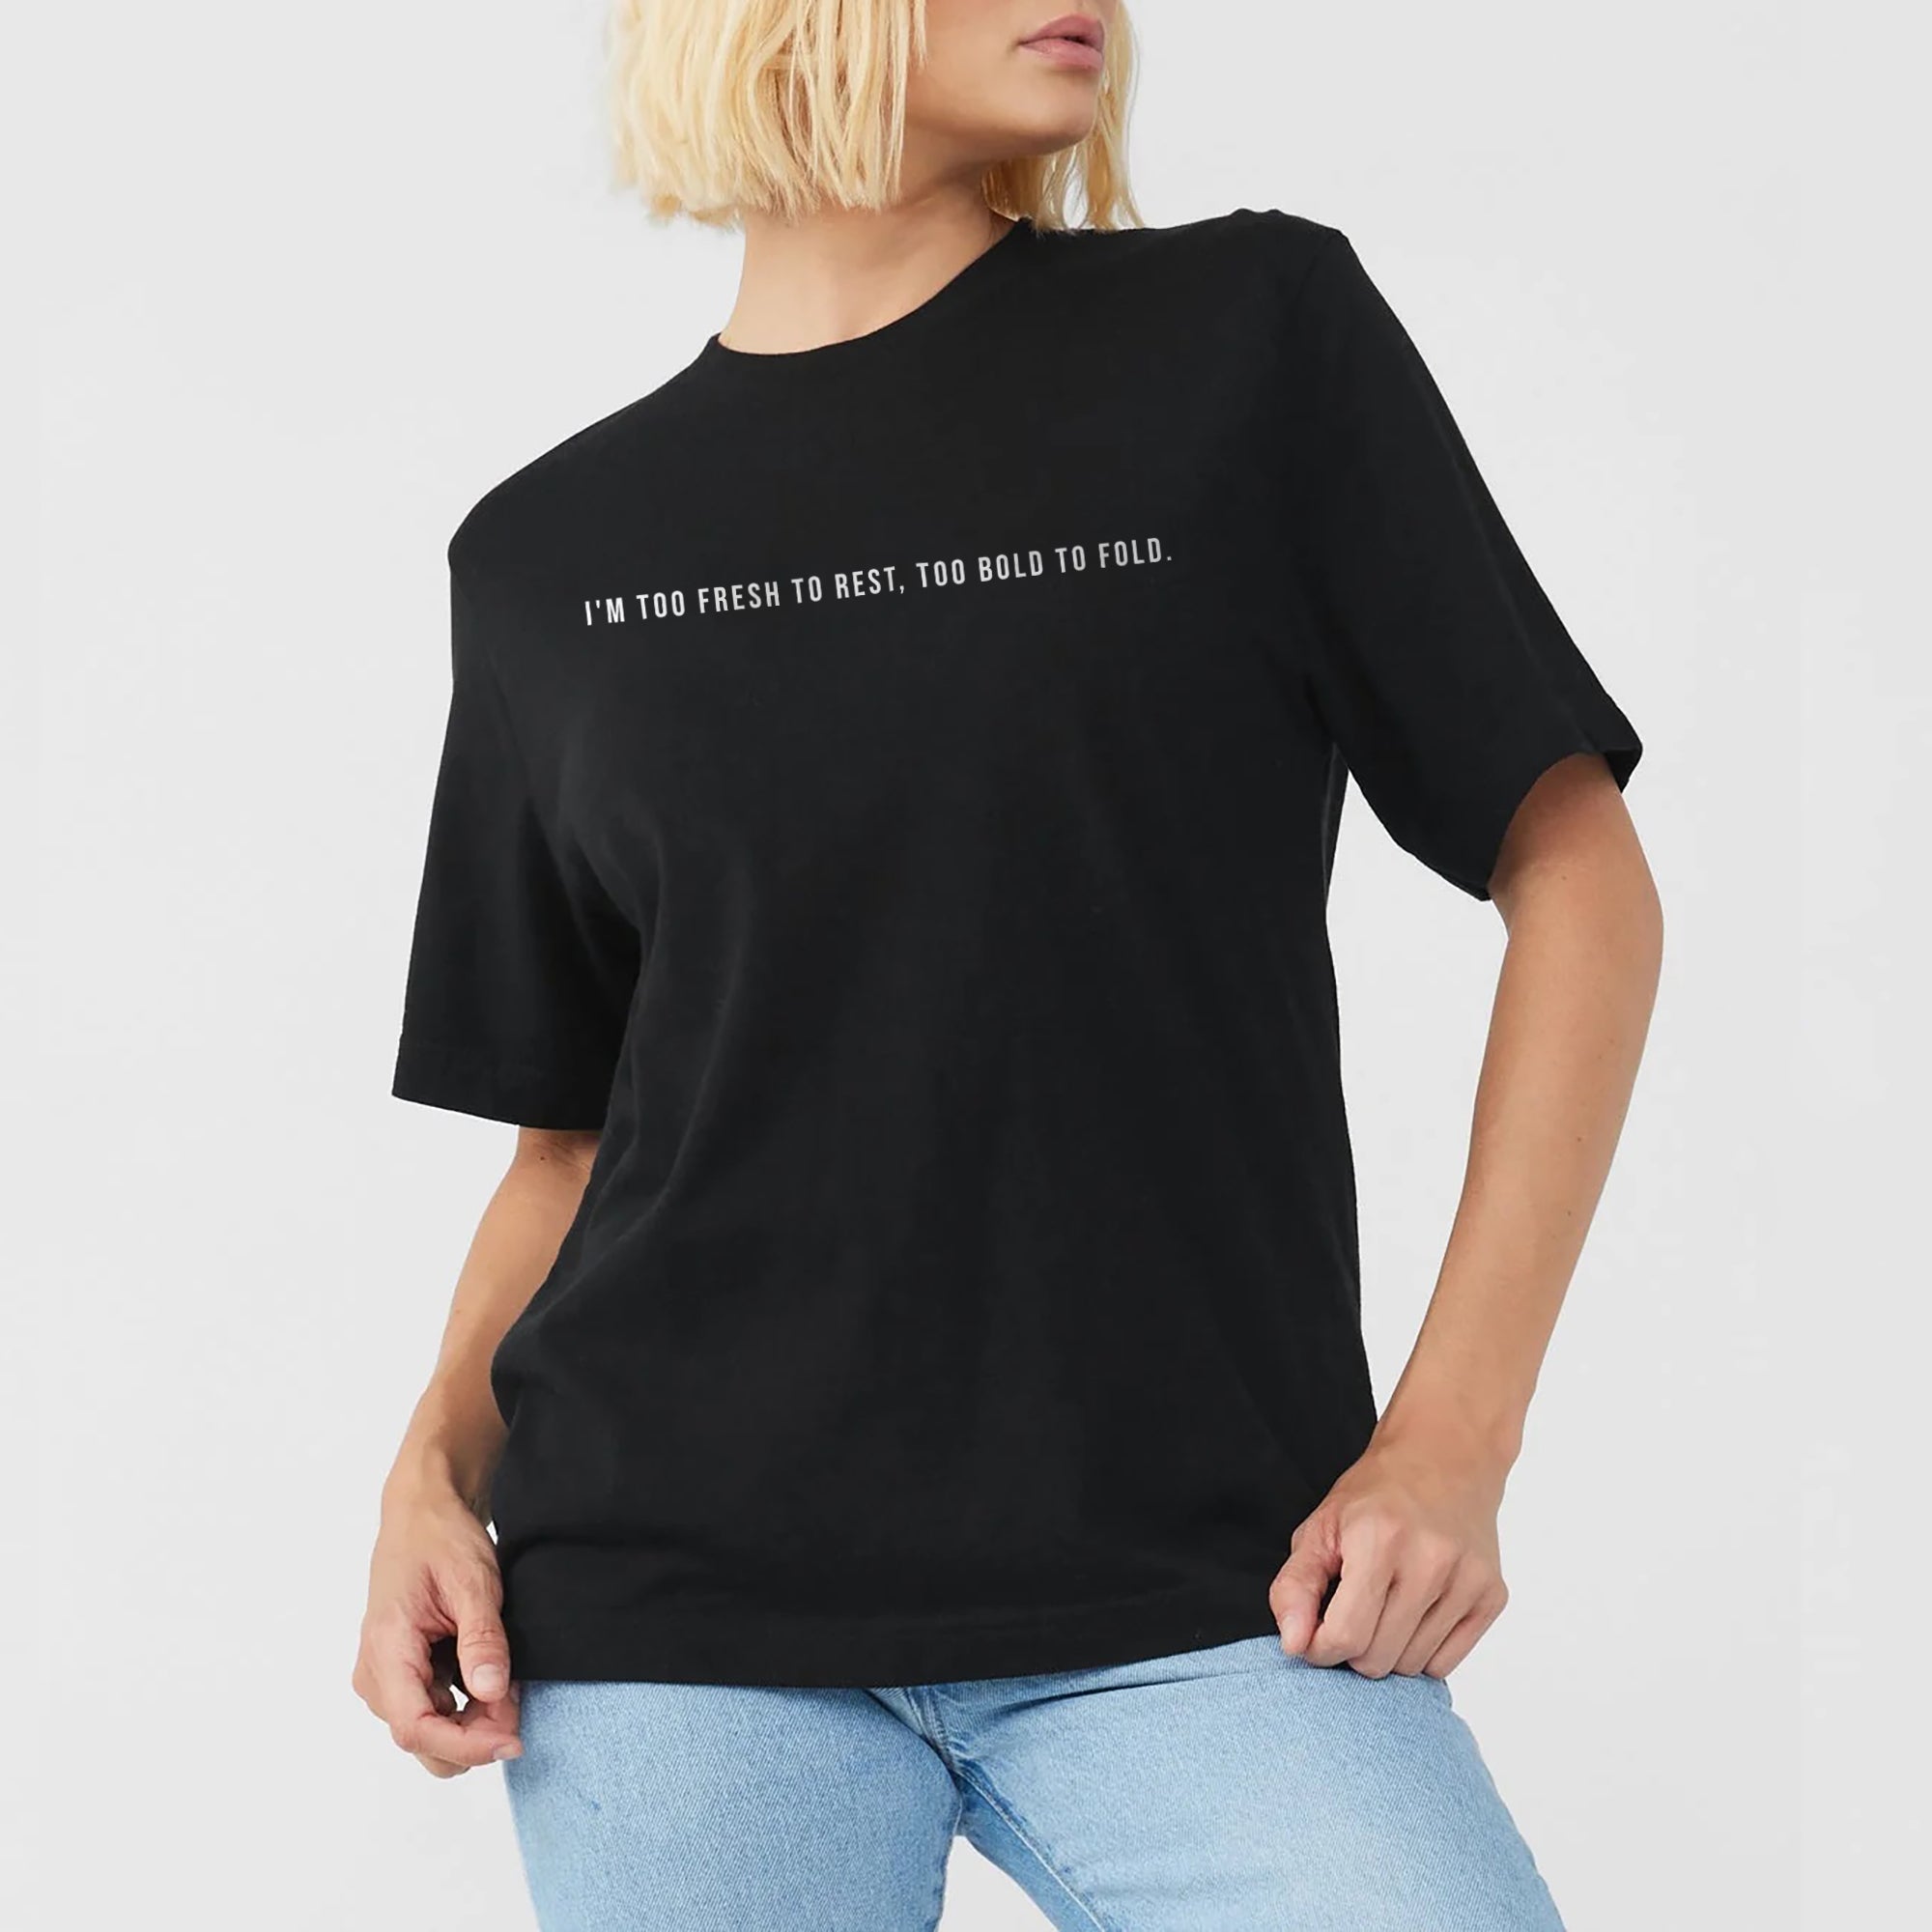 I'm Too Fresh to Rest, Too Bold to Fold Boyfriend Crew Tee Solid Black Model Image